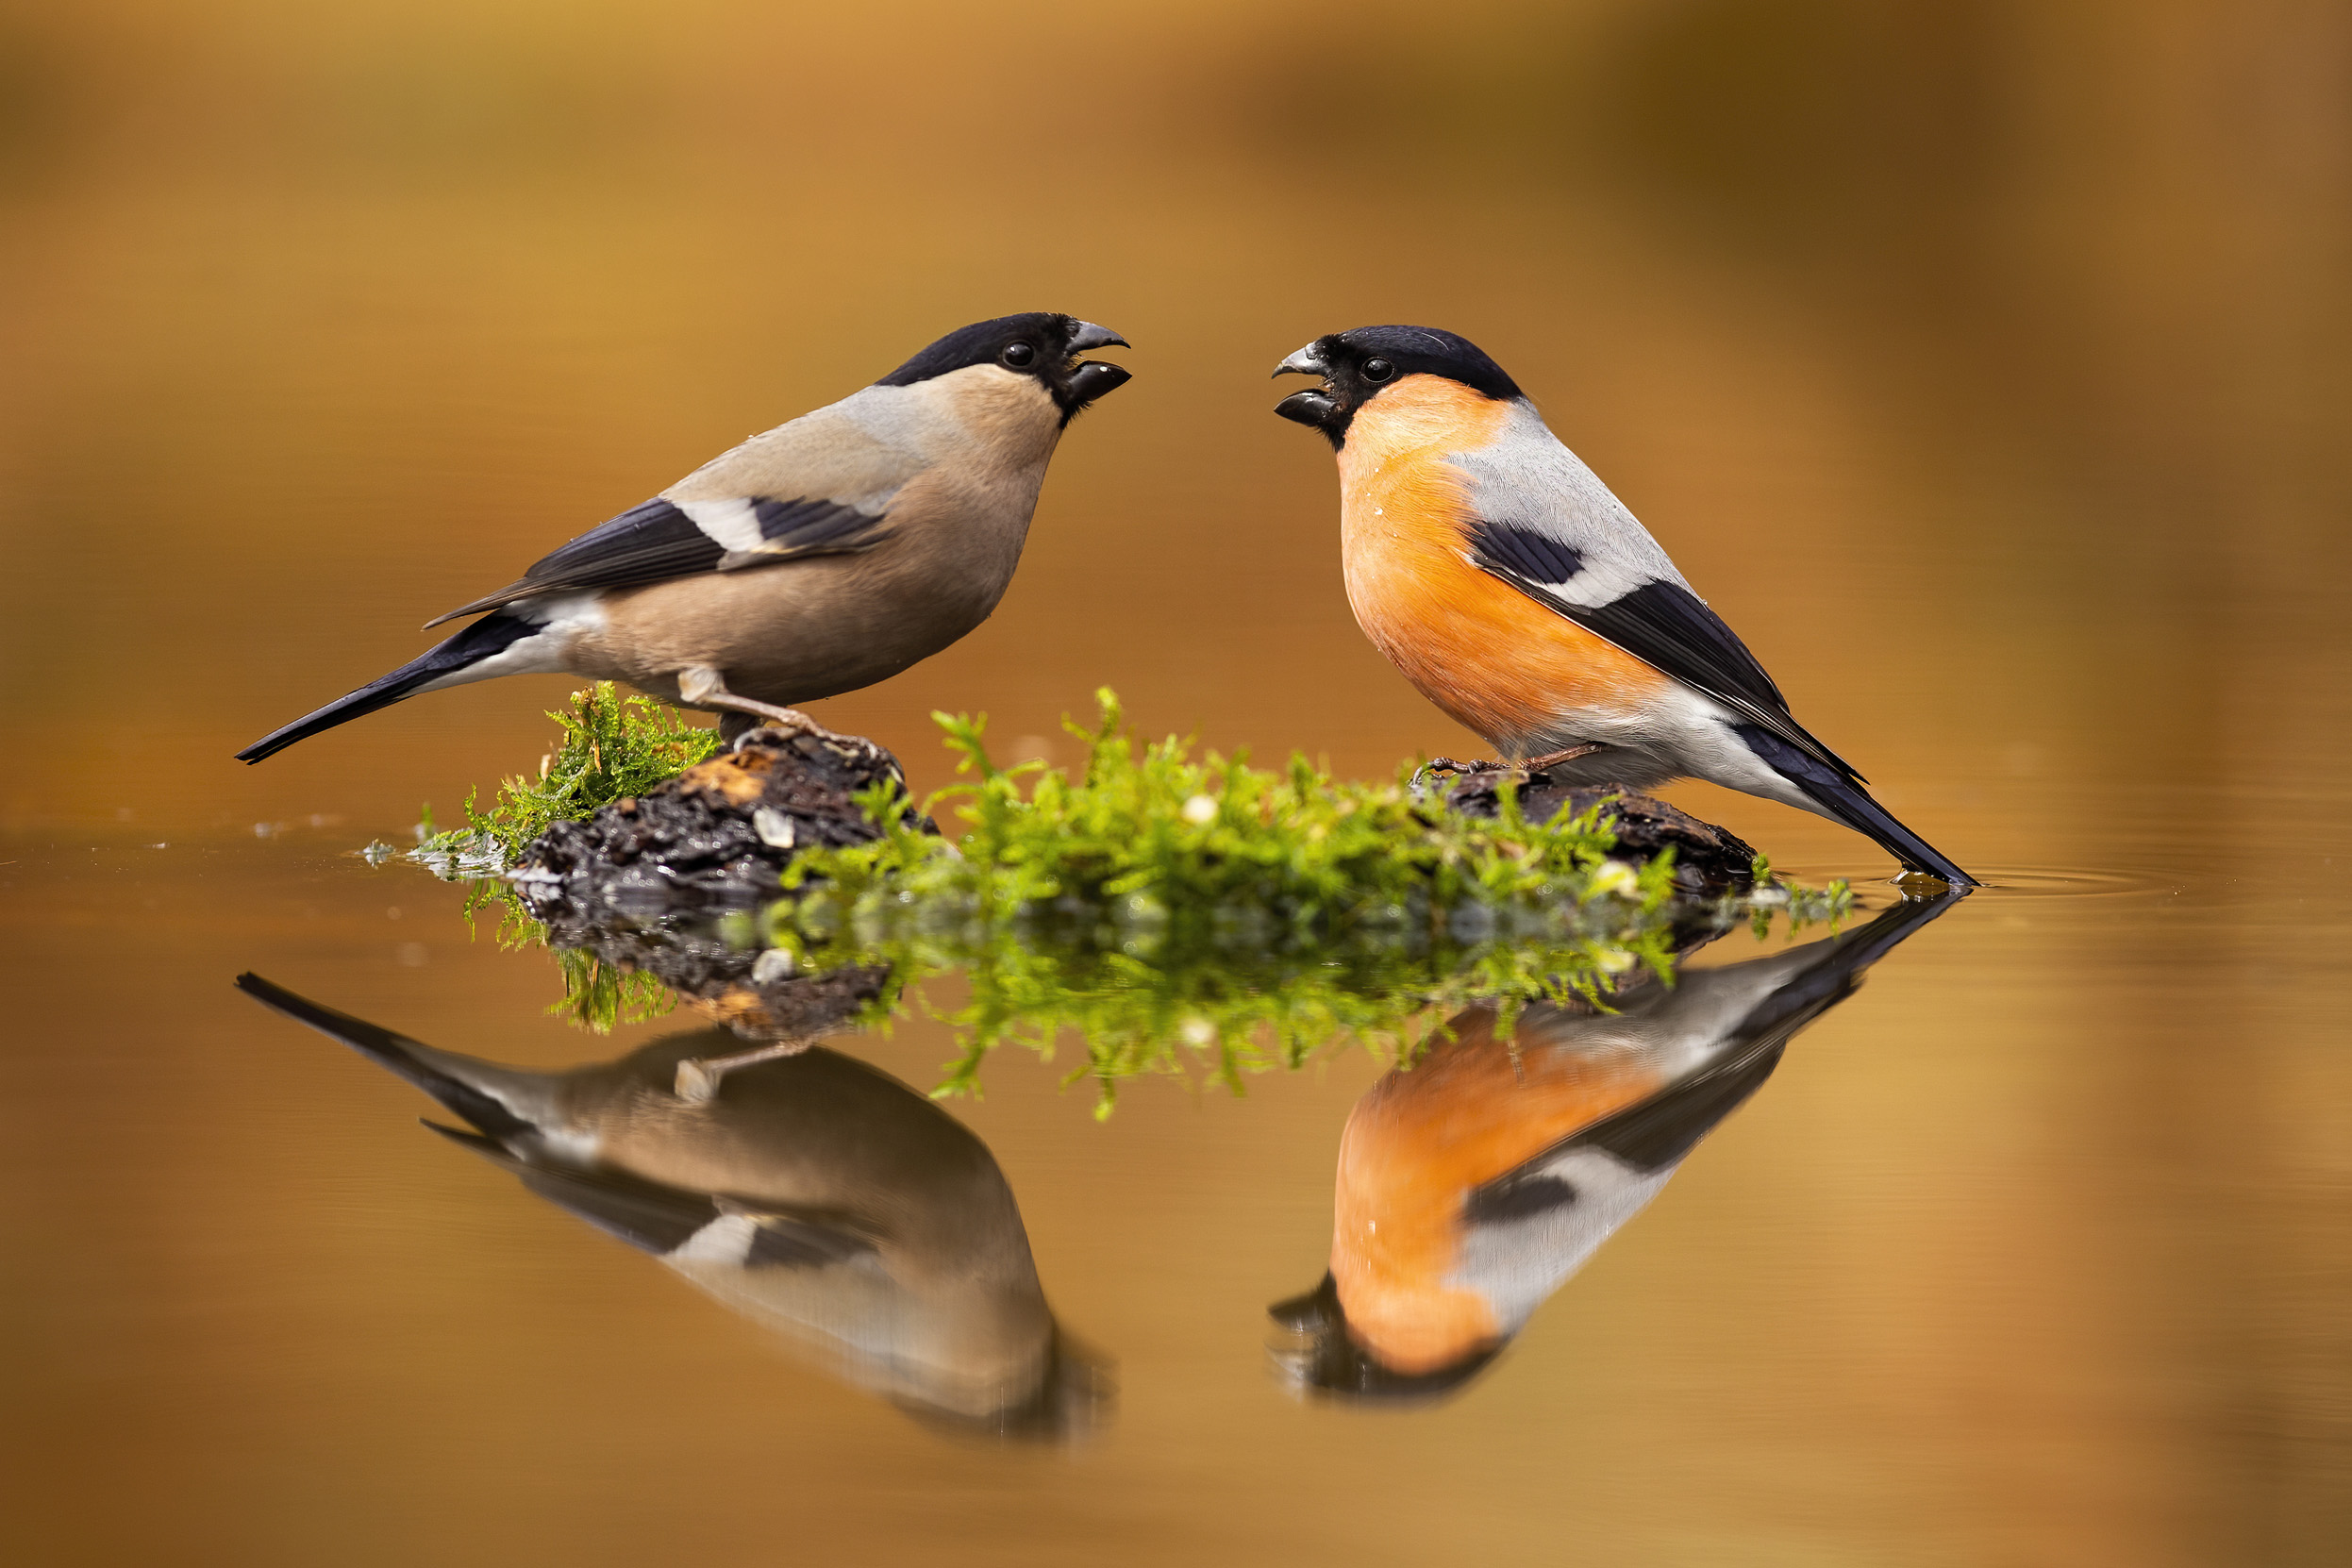 A pair of male and female Eurasian Bullfinch sat on a mossy log.